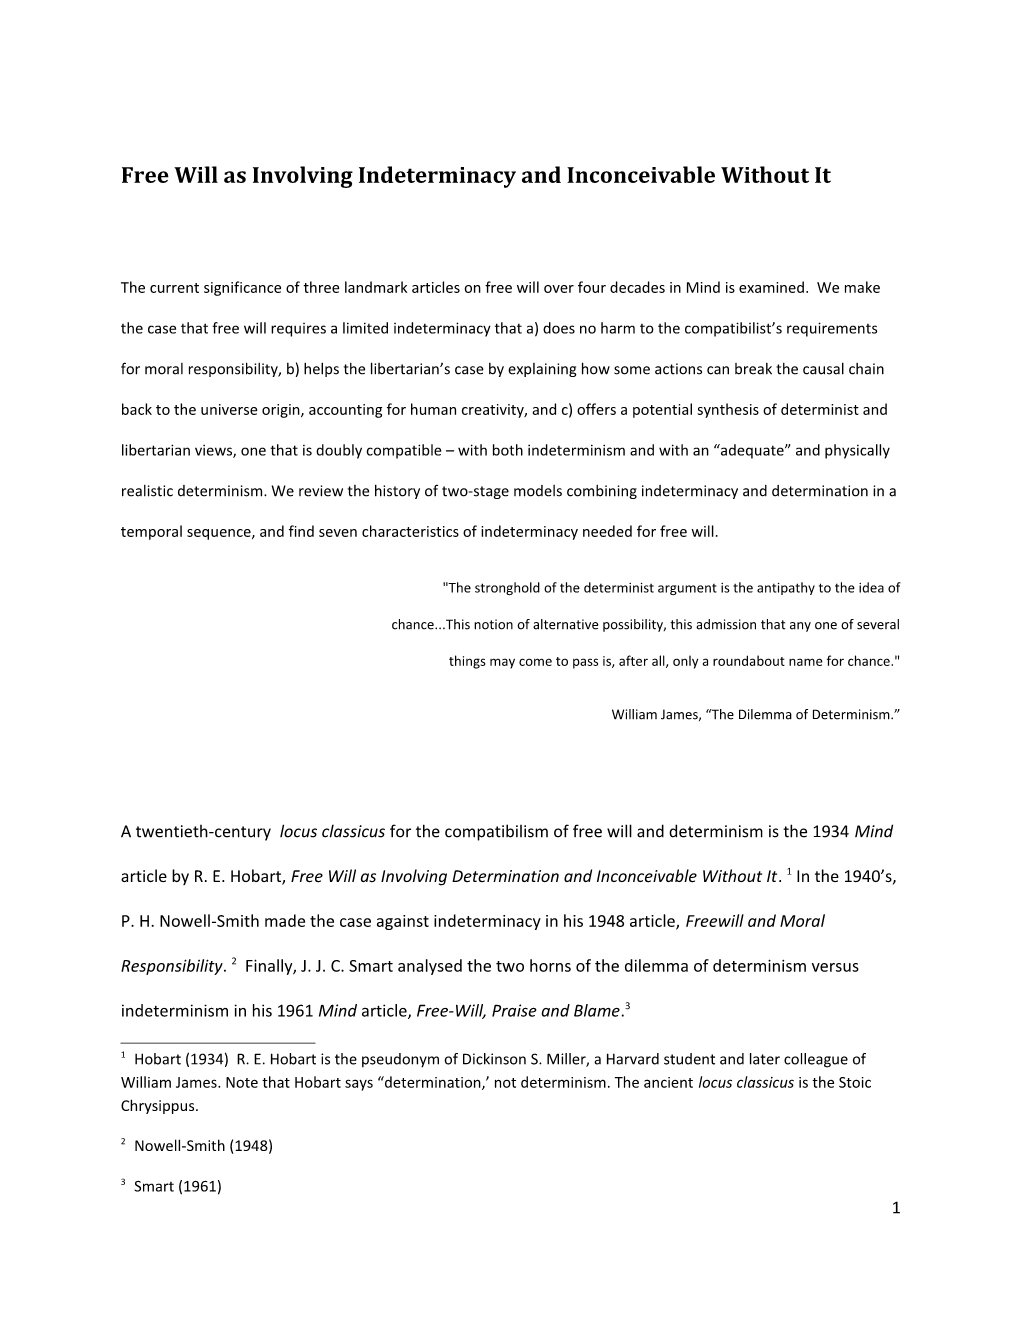 Free Will As Involving Indeterminacy and Inconceivable Without It